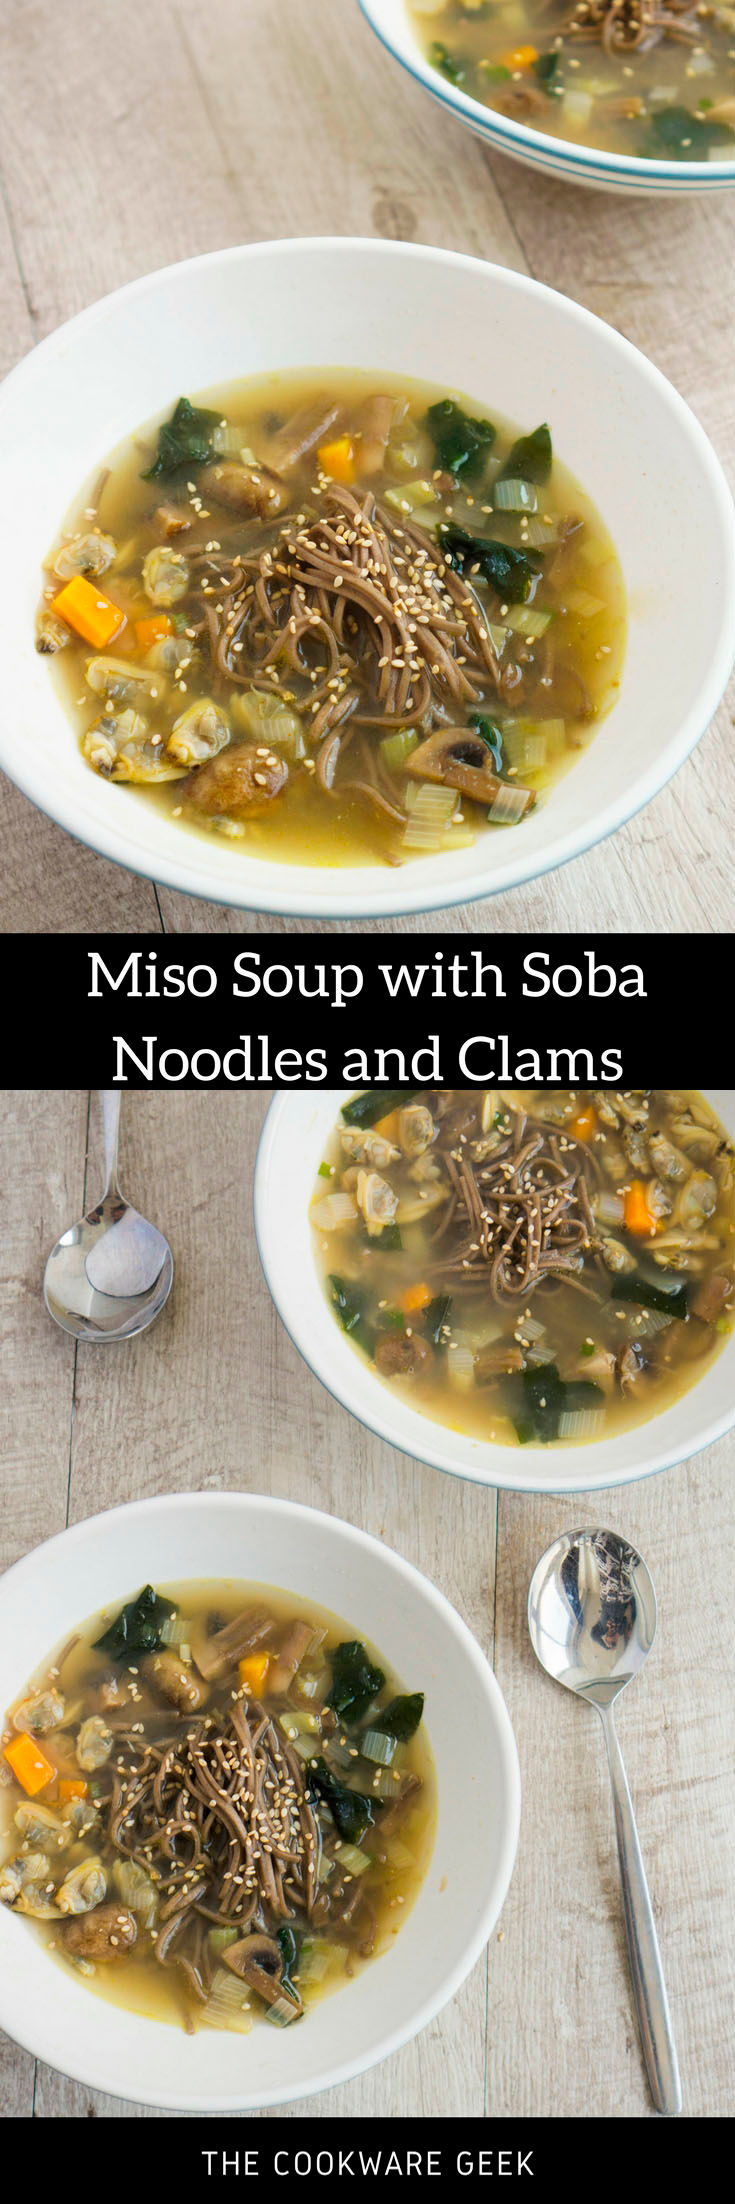 Miso Soup with Soba Noodles and Clams - The Cookware Geek